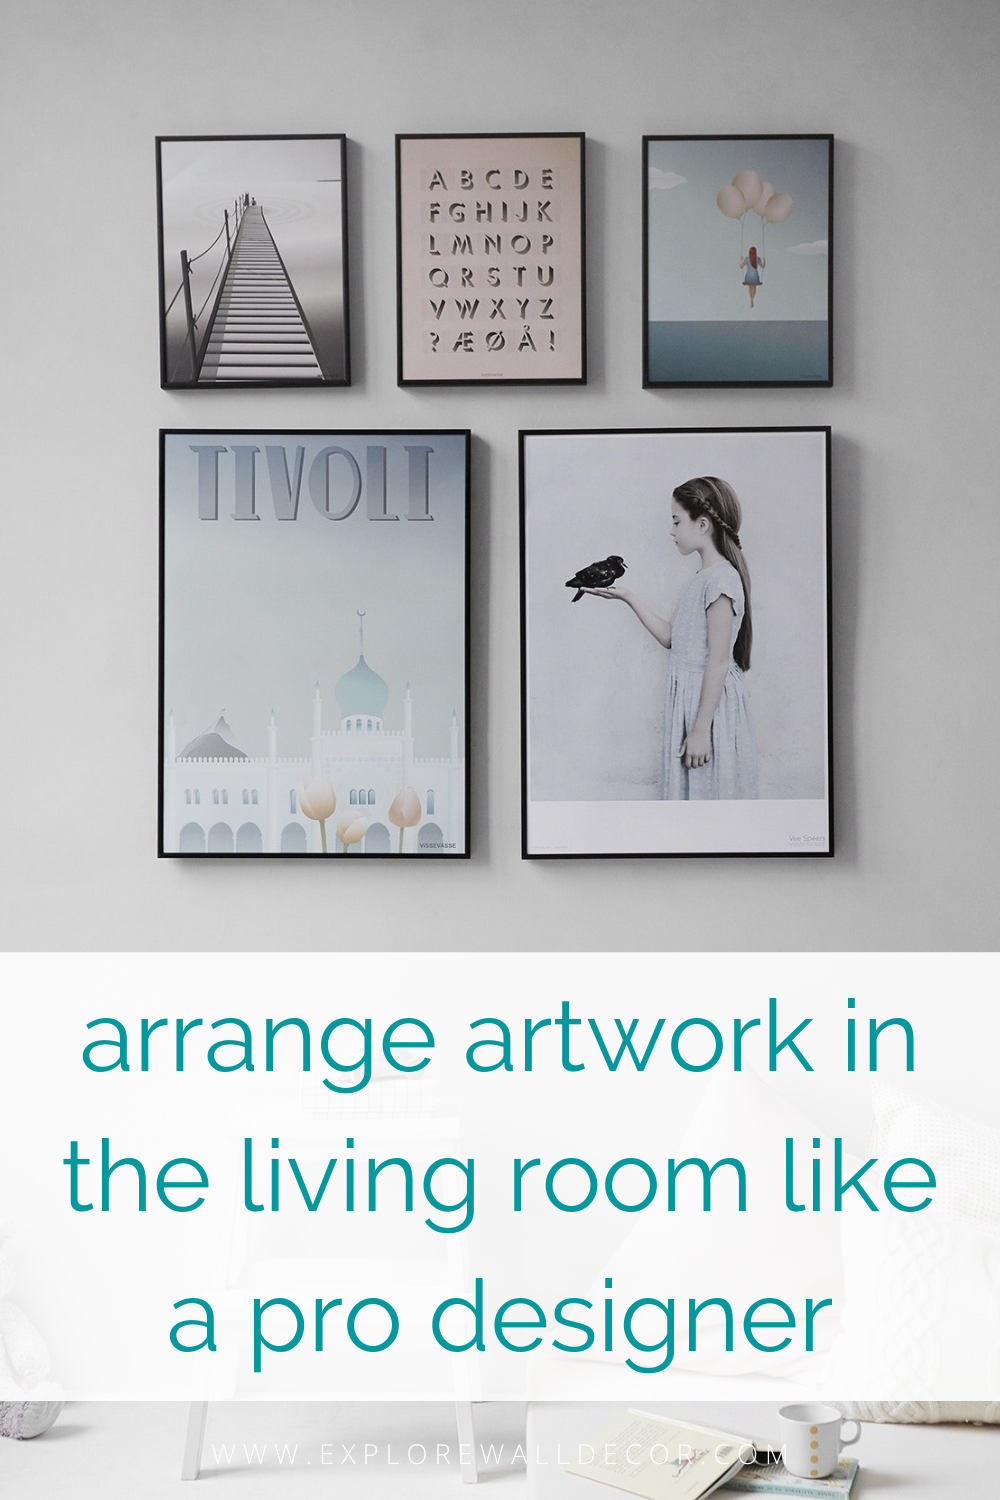 How to Arrange Wall Art in the Living Room Like a Pro - Explore Wall Decor